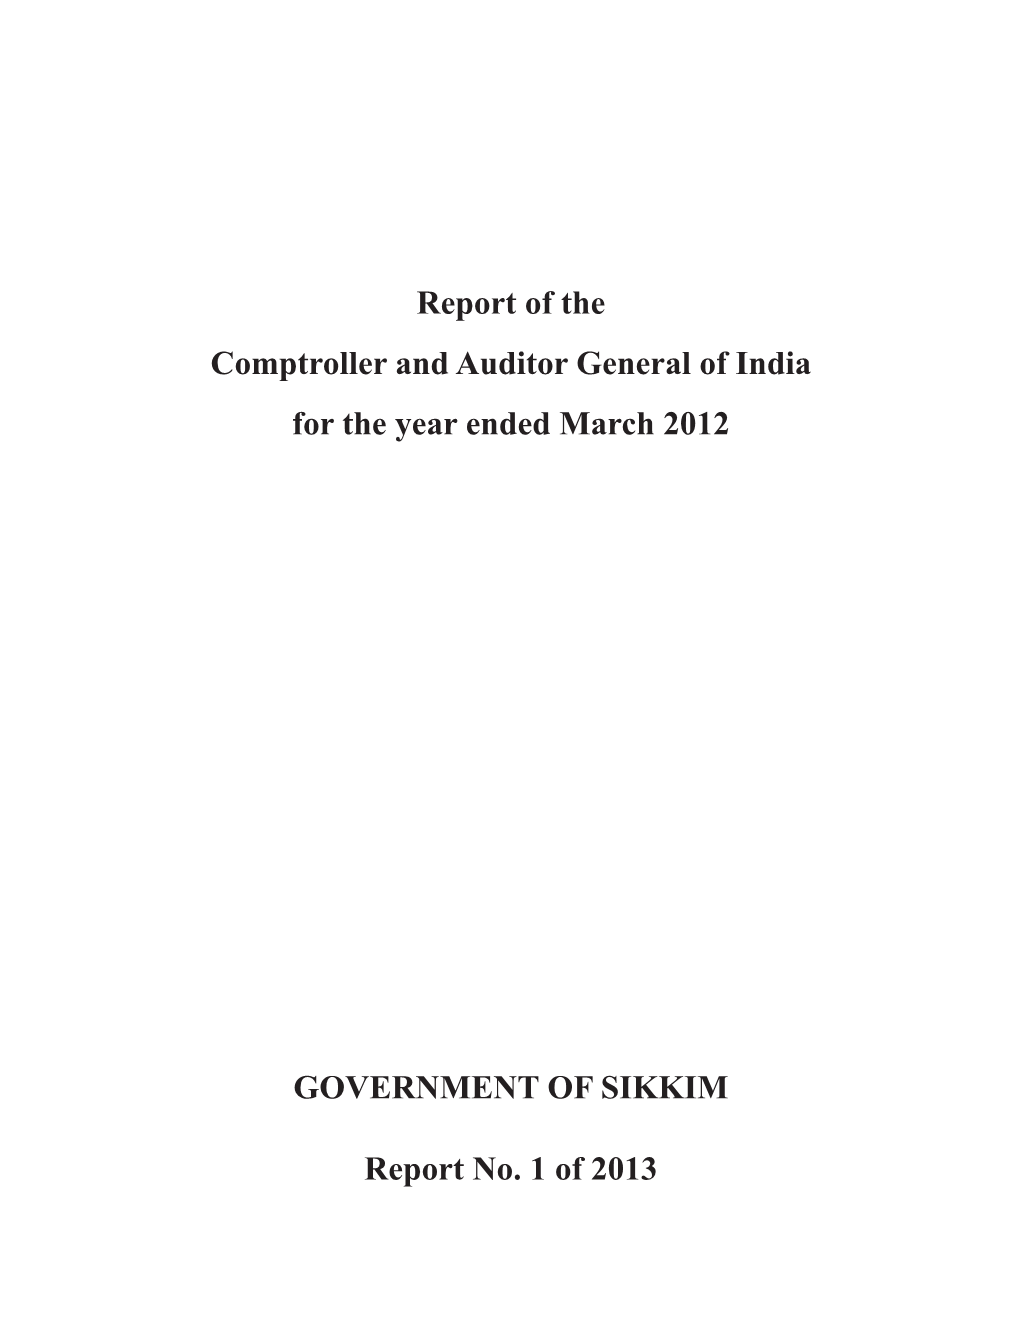 GOVERNMENT of SIKKIM Report No. 1 of 2013 Report Of